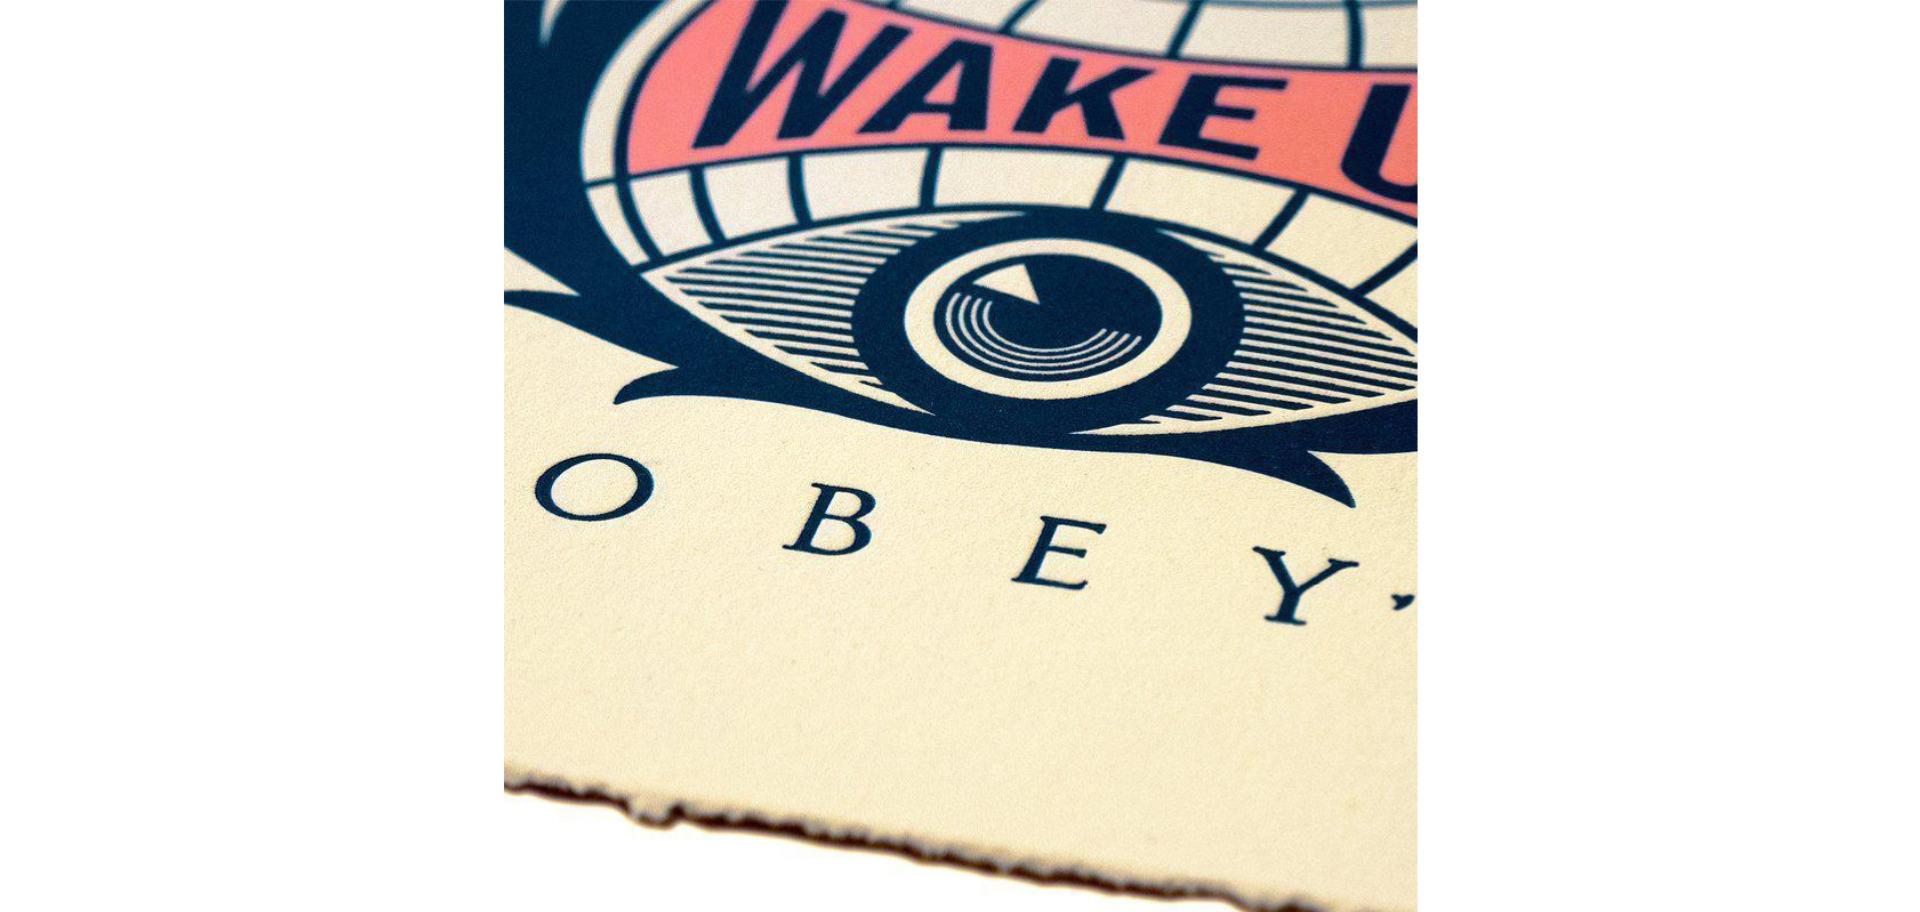 Wake Up Earth, Letterpress Print on Cream Cotton Paper, 2020 by Shepard Fairey For Sale 1